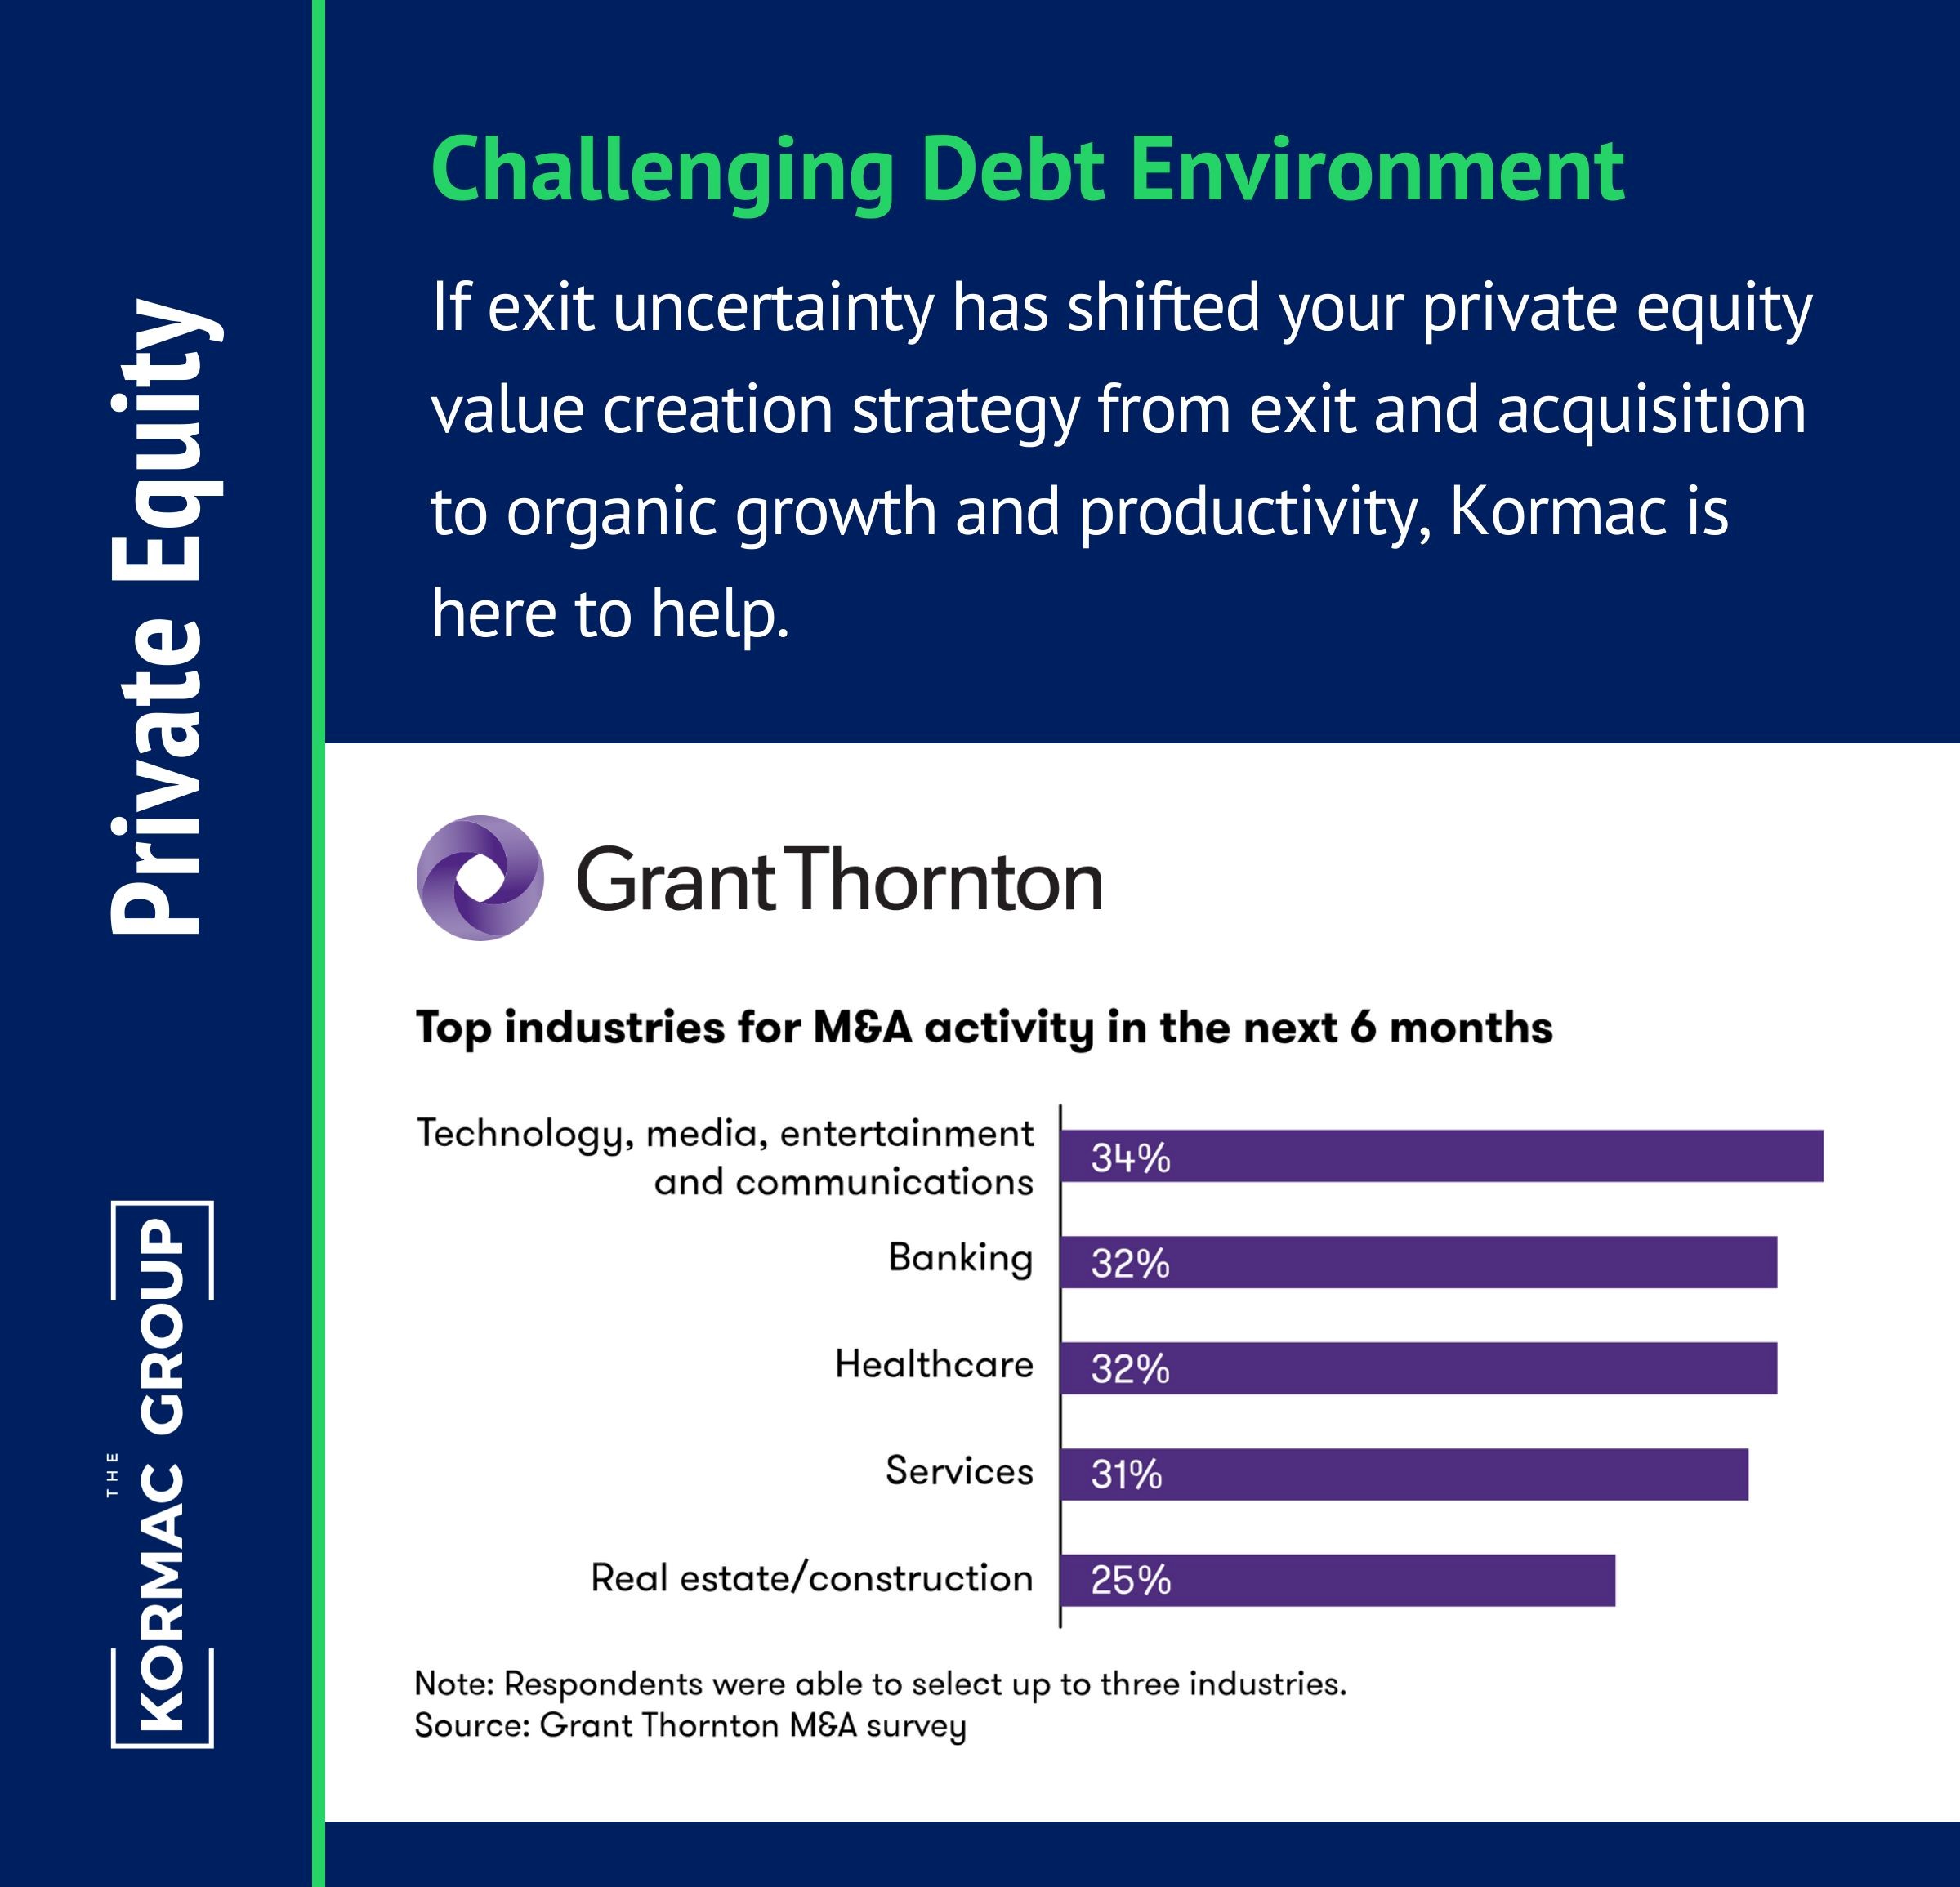 Private Equity: Challenging Debt Environment. If uncertainty has shifted your private equity value creation strategy from exit and acquisition to organic growth and productivity, Kormac is here to help. Grant Thornton's survey on the Top industries for M&A activity in the next 6 months shows that 34% goes to Technology, media, entertainment and communications. 32% goes to Banking. 32% goes to Healthcare. 31% goes to Services, and 25% goes to Real Estate/construction. It is noted that respondents were able to select up to three industries.